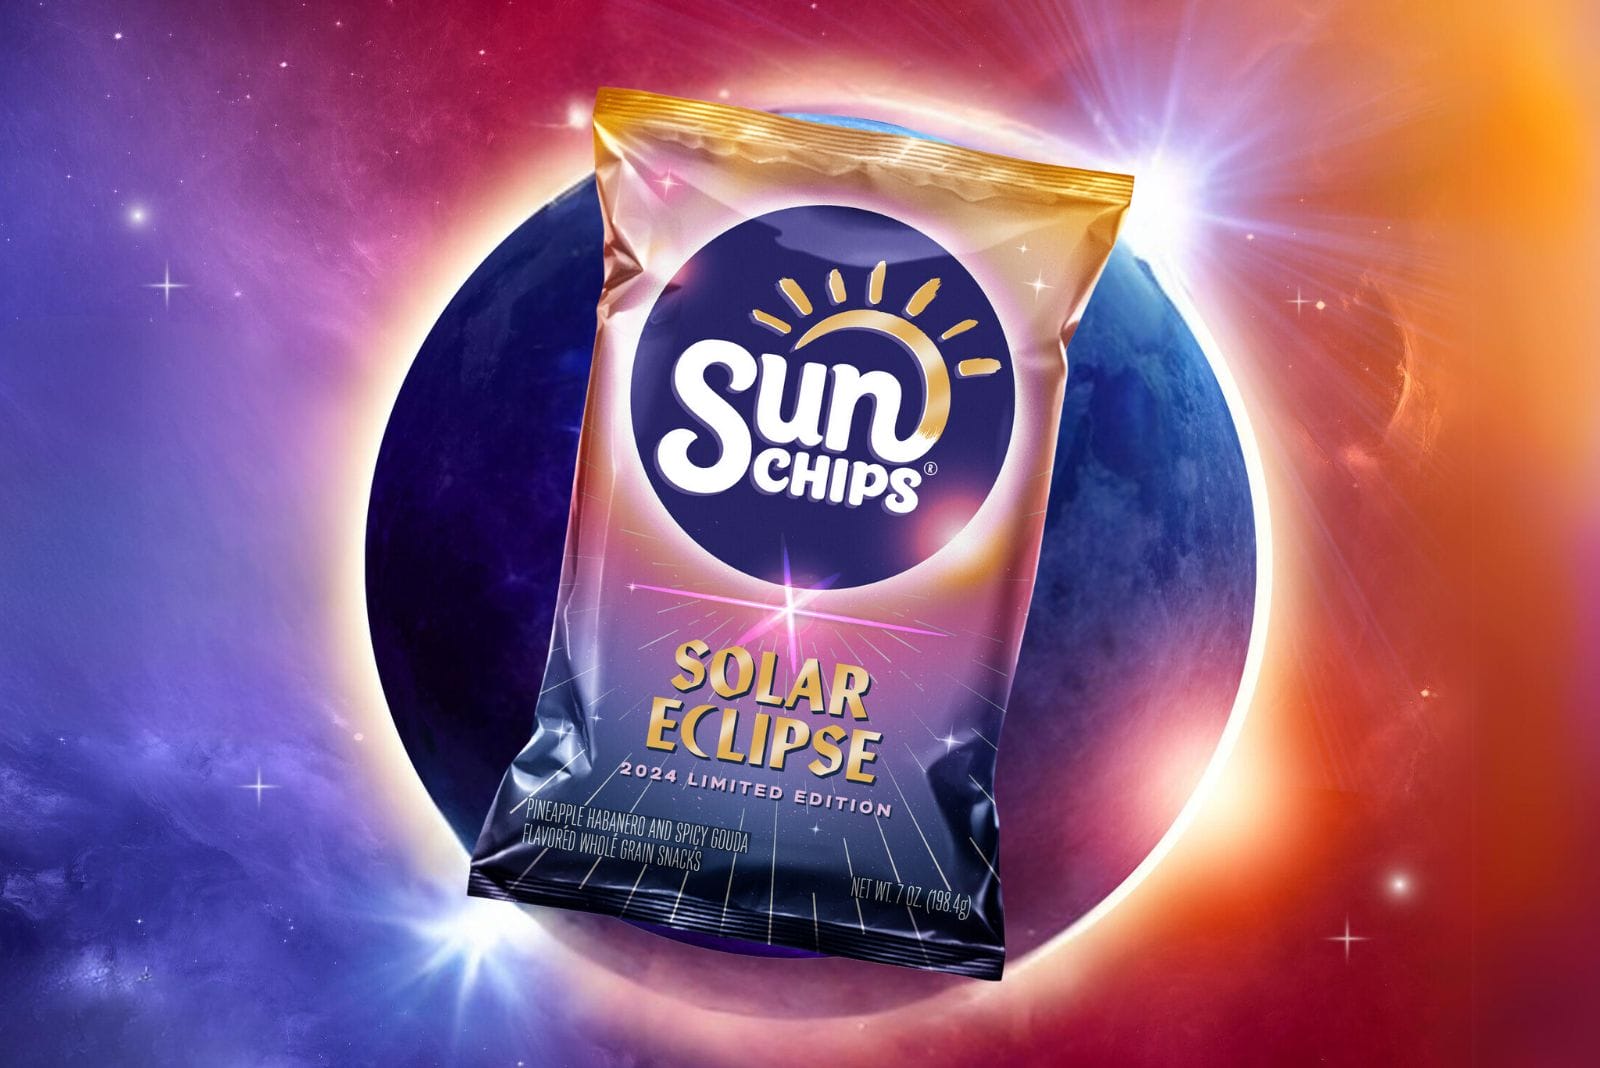 Special edition package of sun chips on top of a solar eclipse